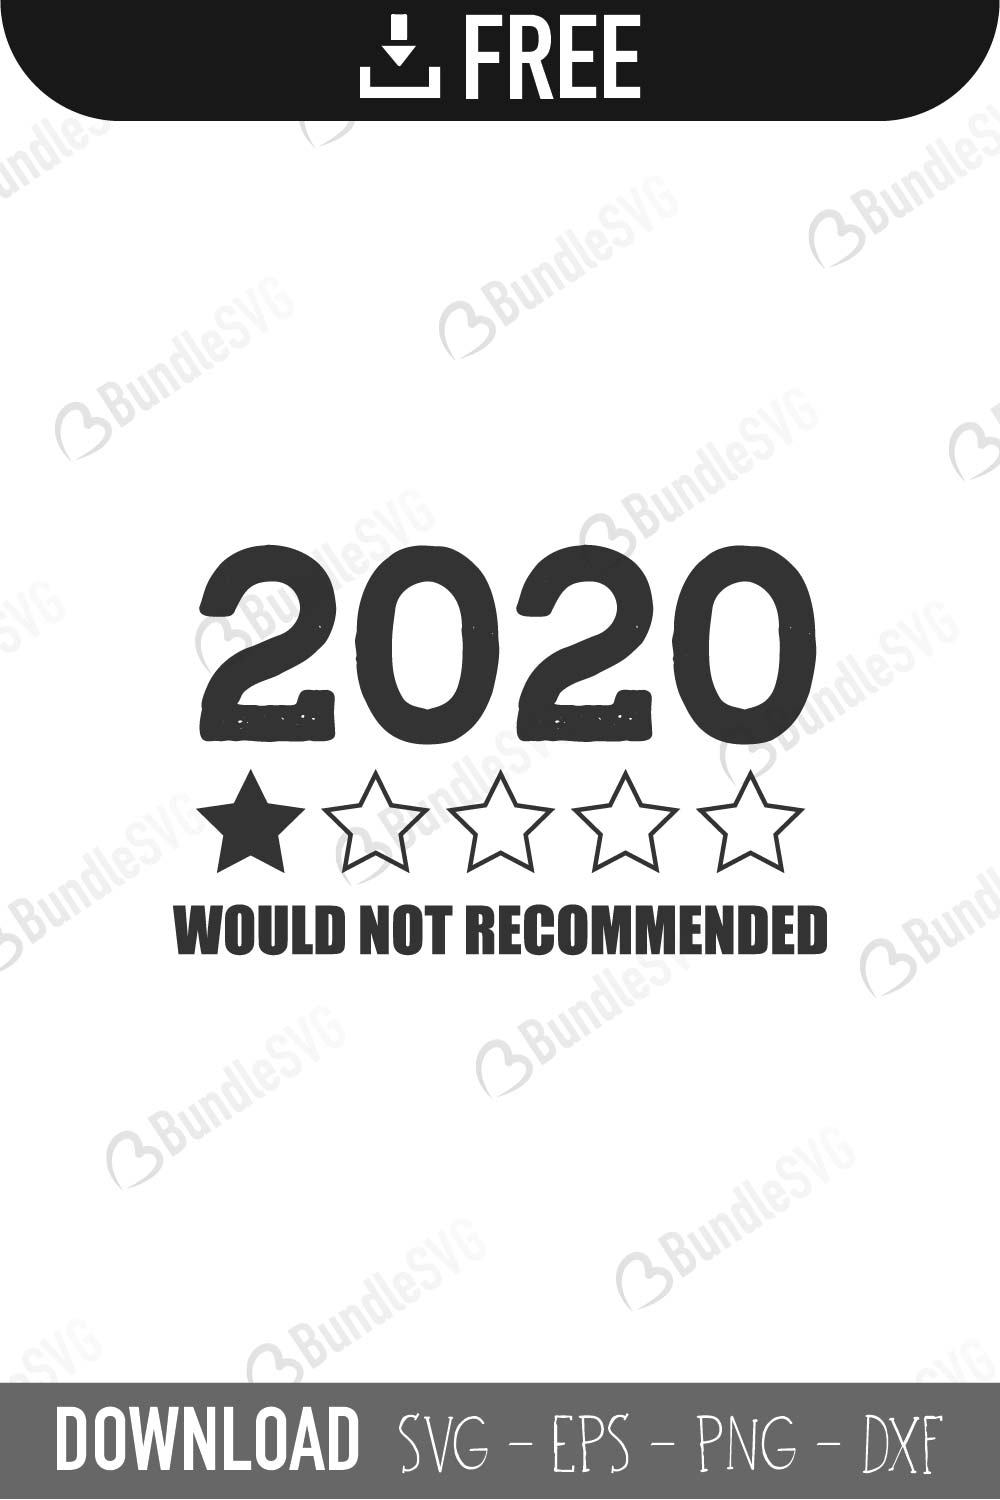 Would Not Recommended Svg Cut Files Free Download Bundlesvg